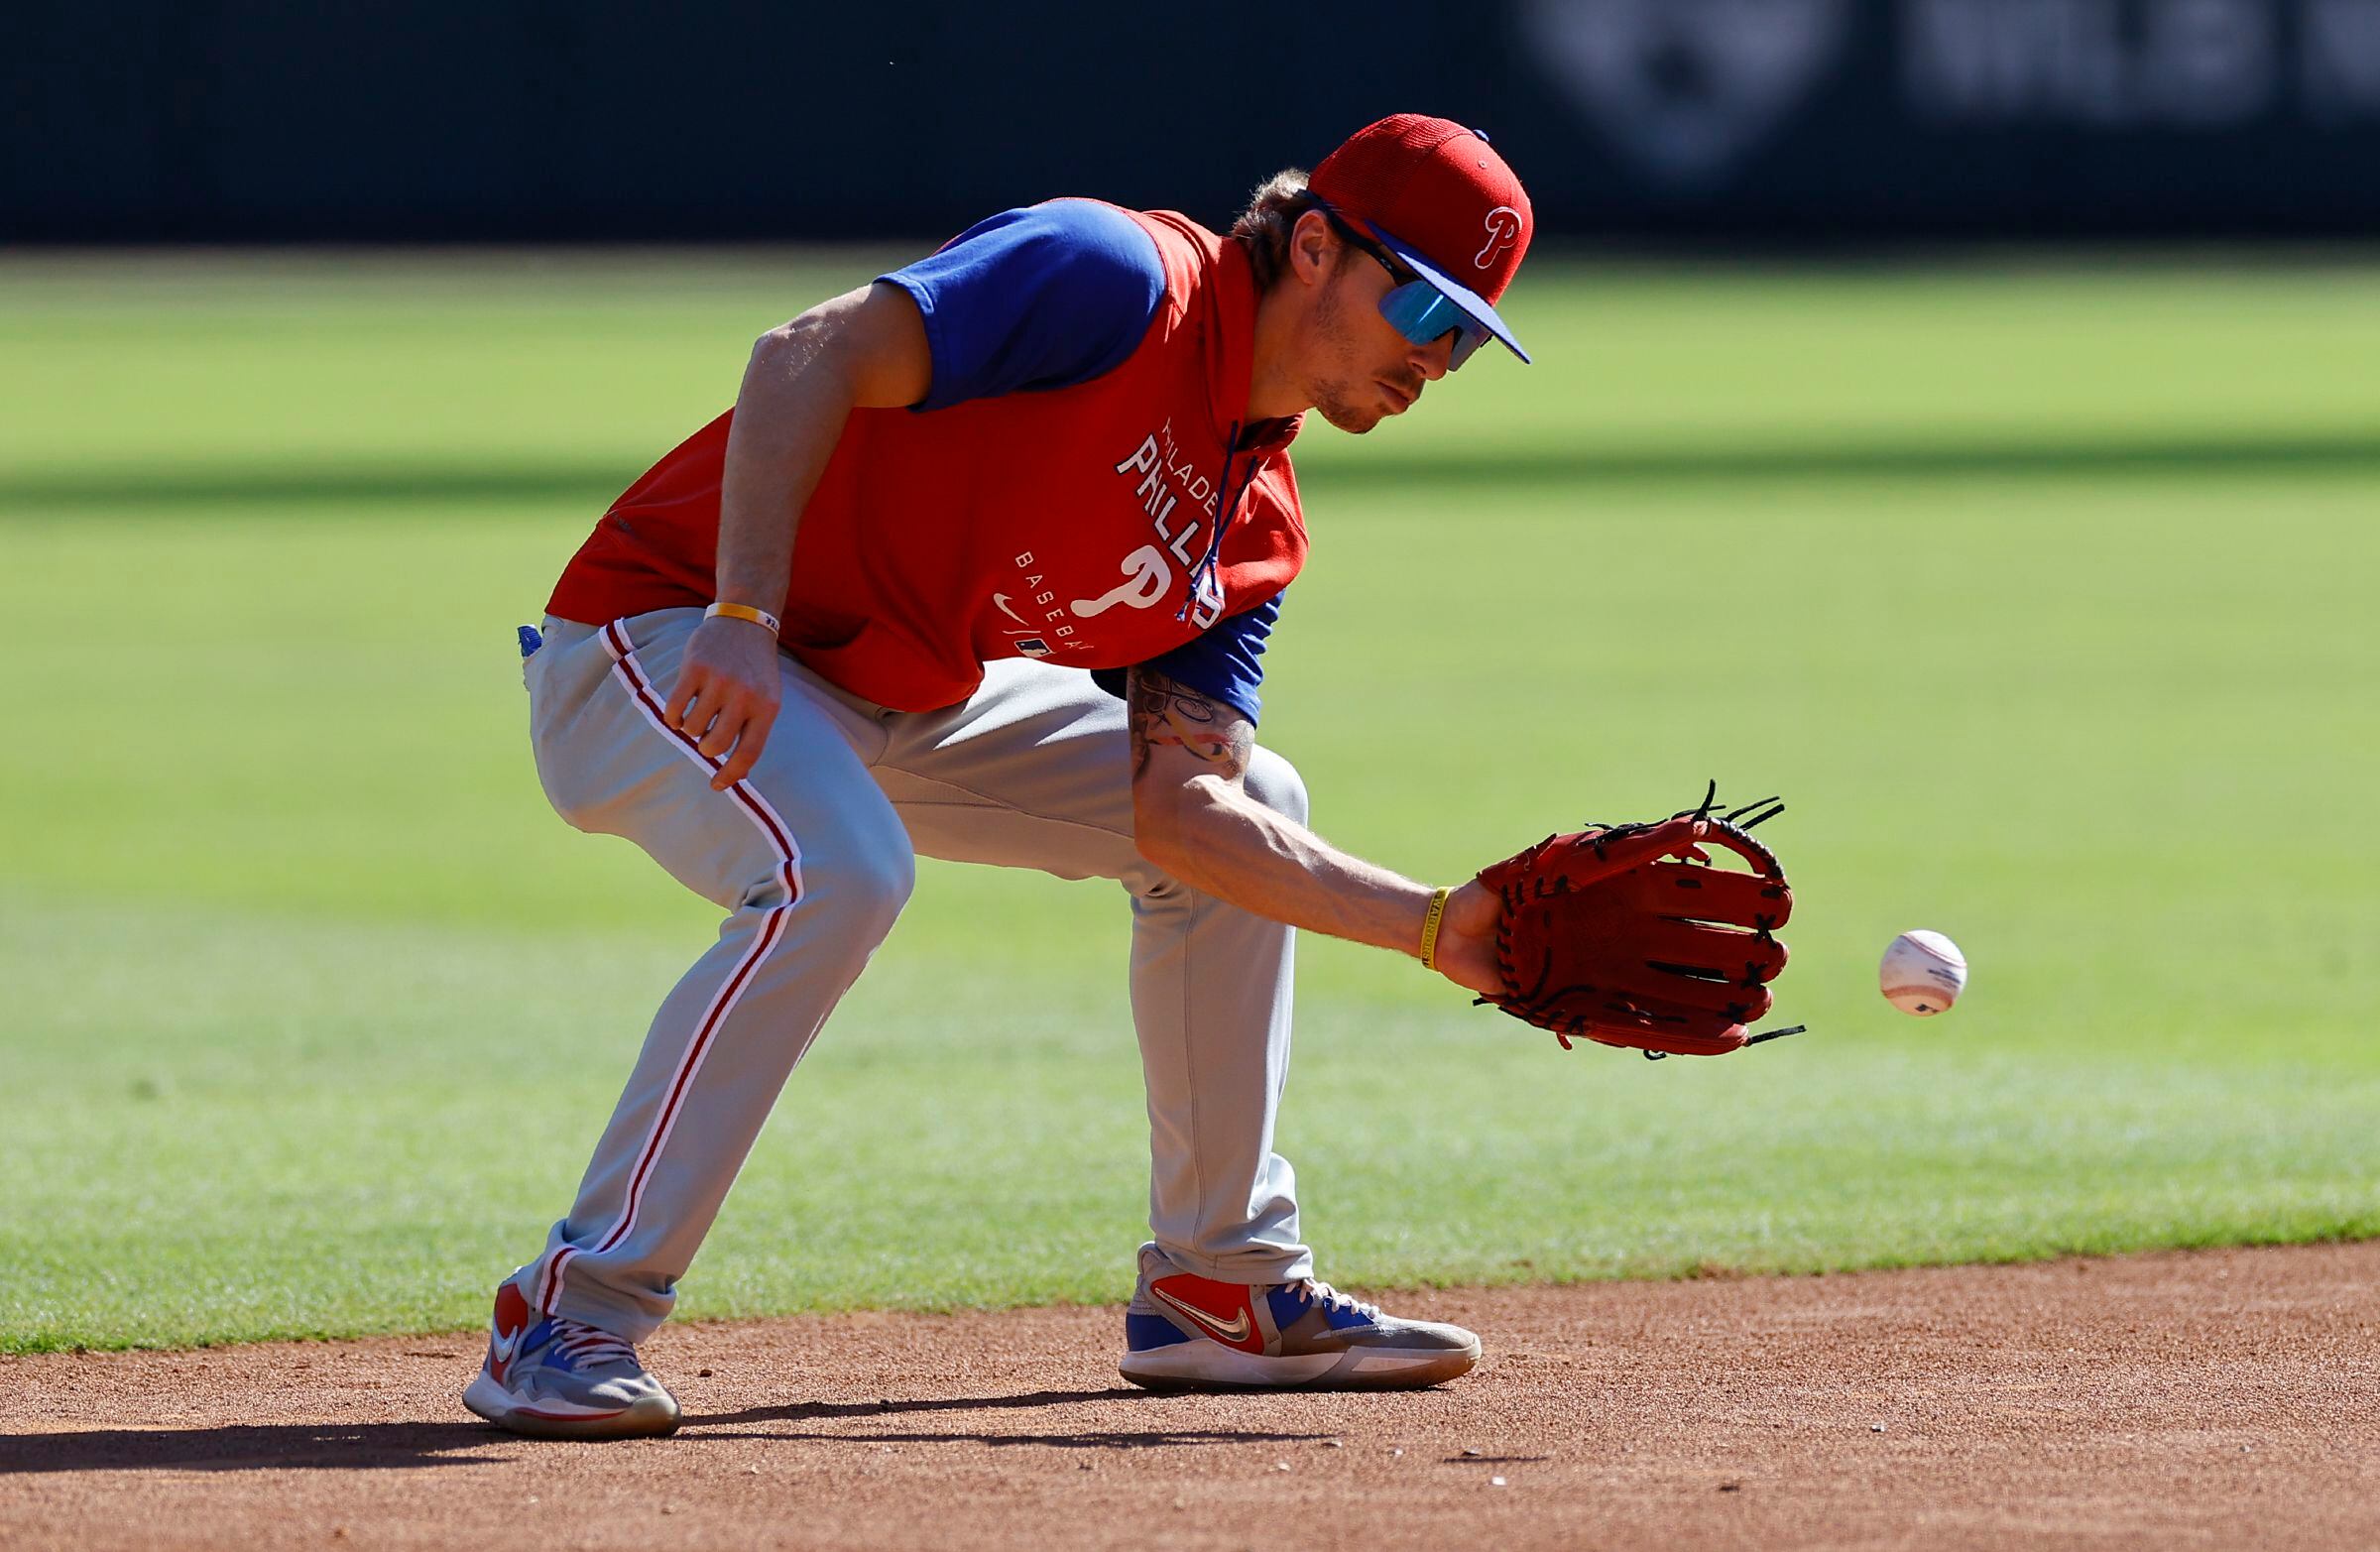 Ranger Suárez exits early, Phillies blown out in fifth straight